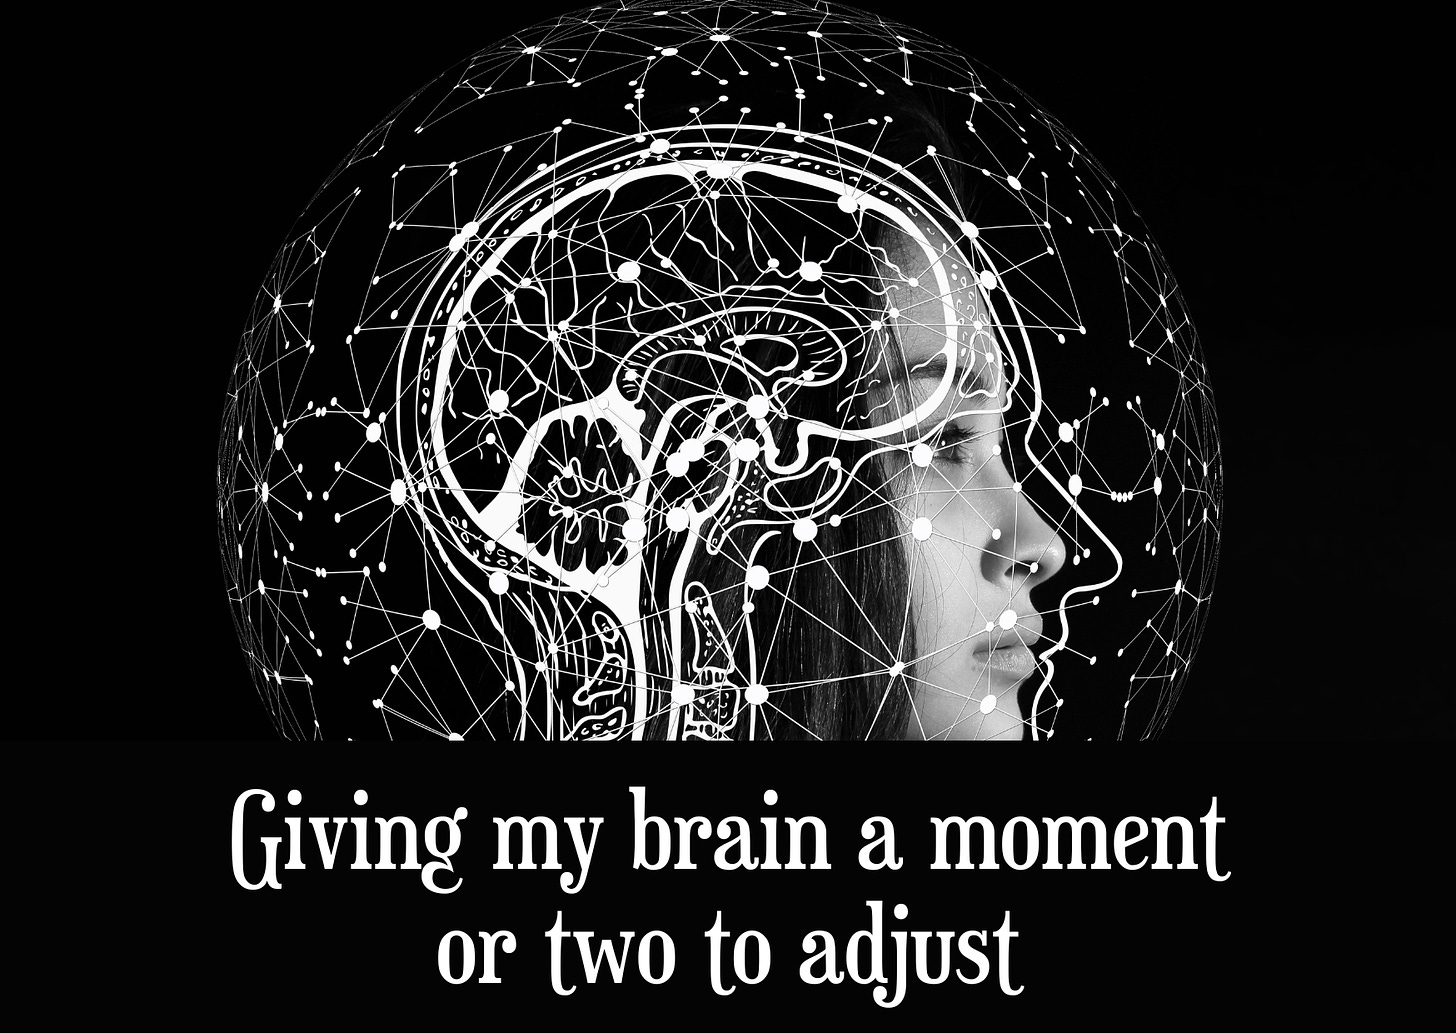 Header image showing a photo of the side profile of a woman with a sketch of a brain and skull superimposed and surrounded by a lattice-work sphere on a black background with the text giving my brain a moment or two to adjust.